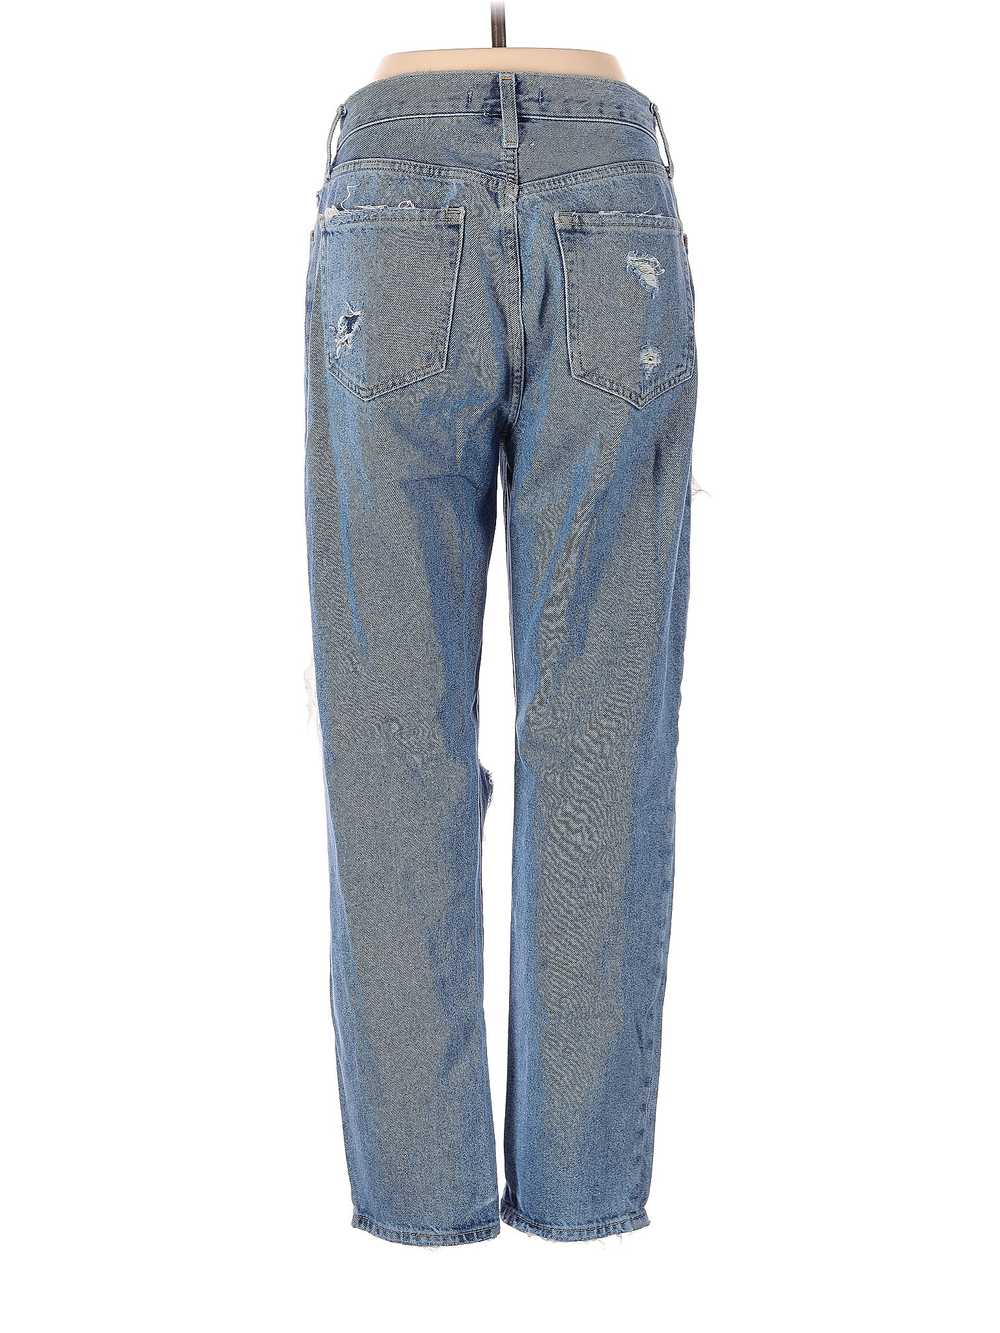 Forever 21 Women Blue Jeans 27W - image 2